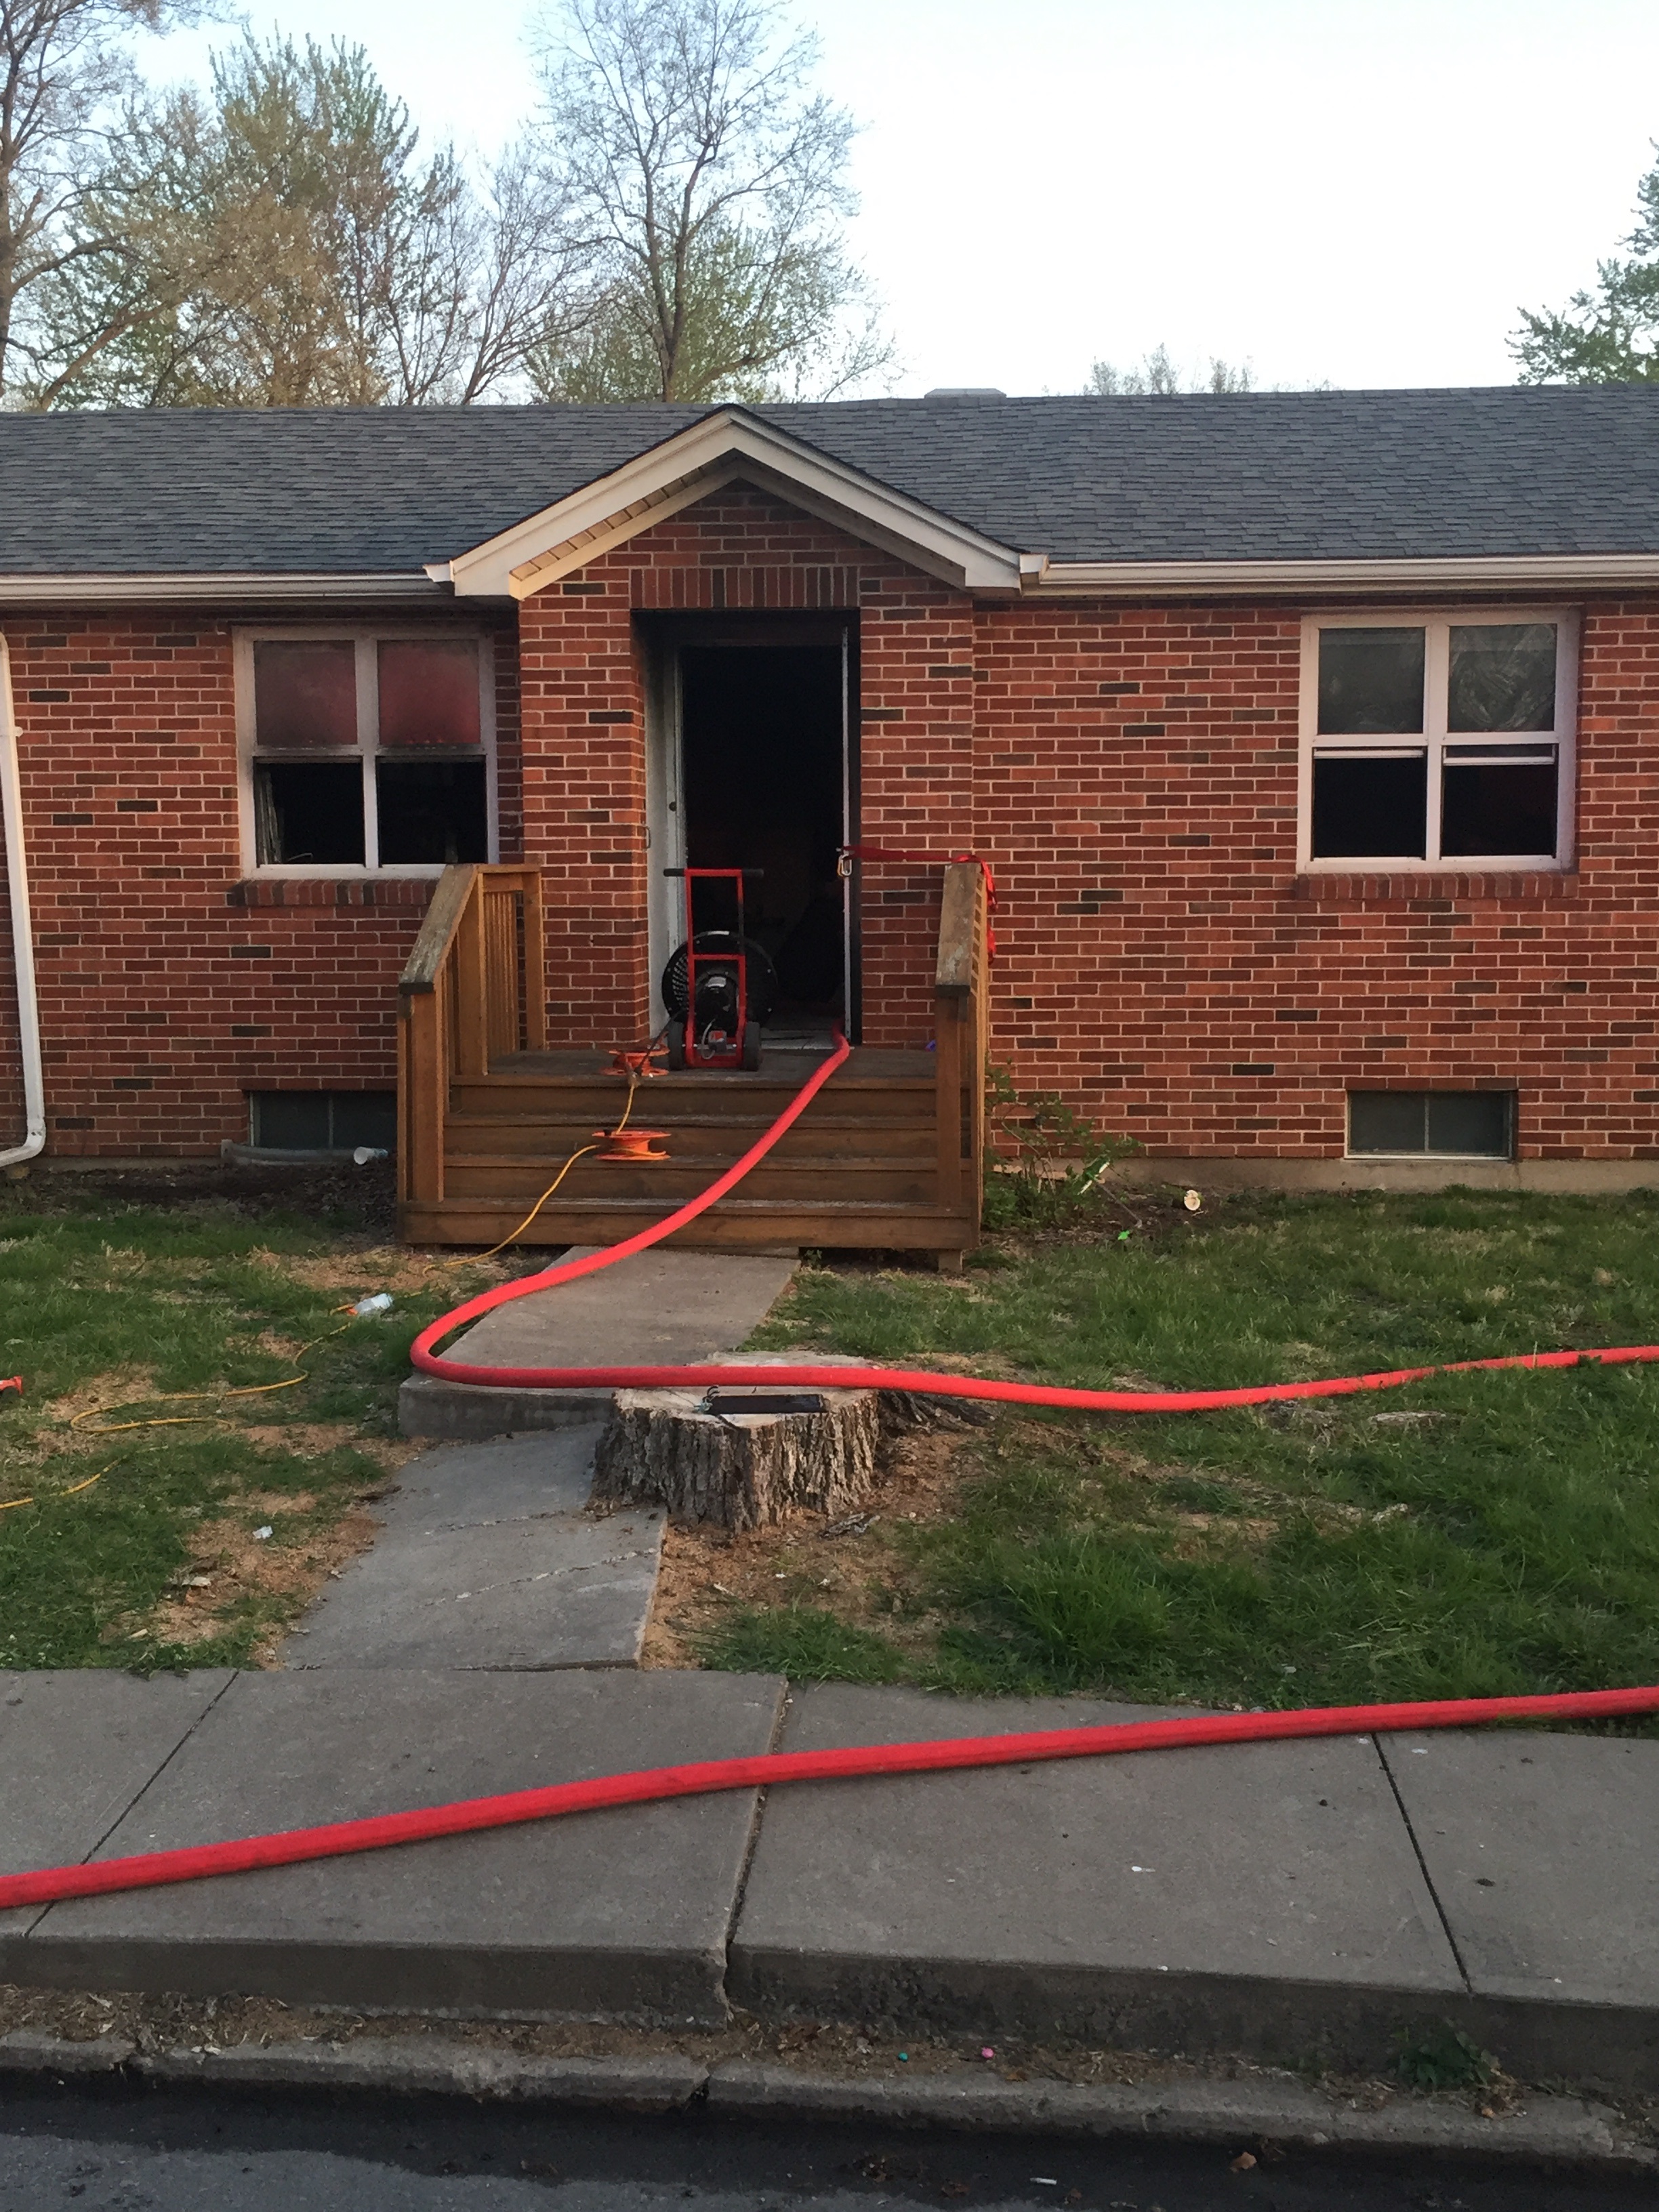 Fifty Thousand in Damage In Accidental Fulton House Fire